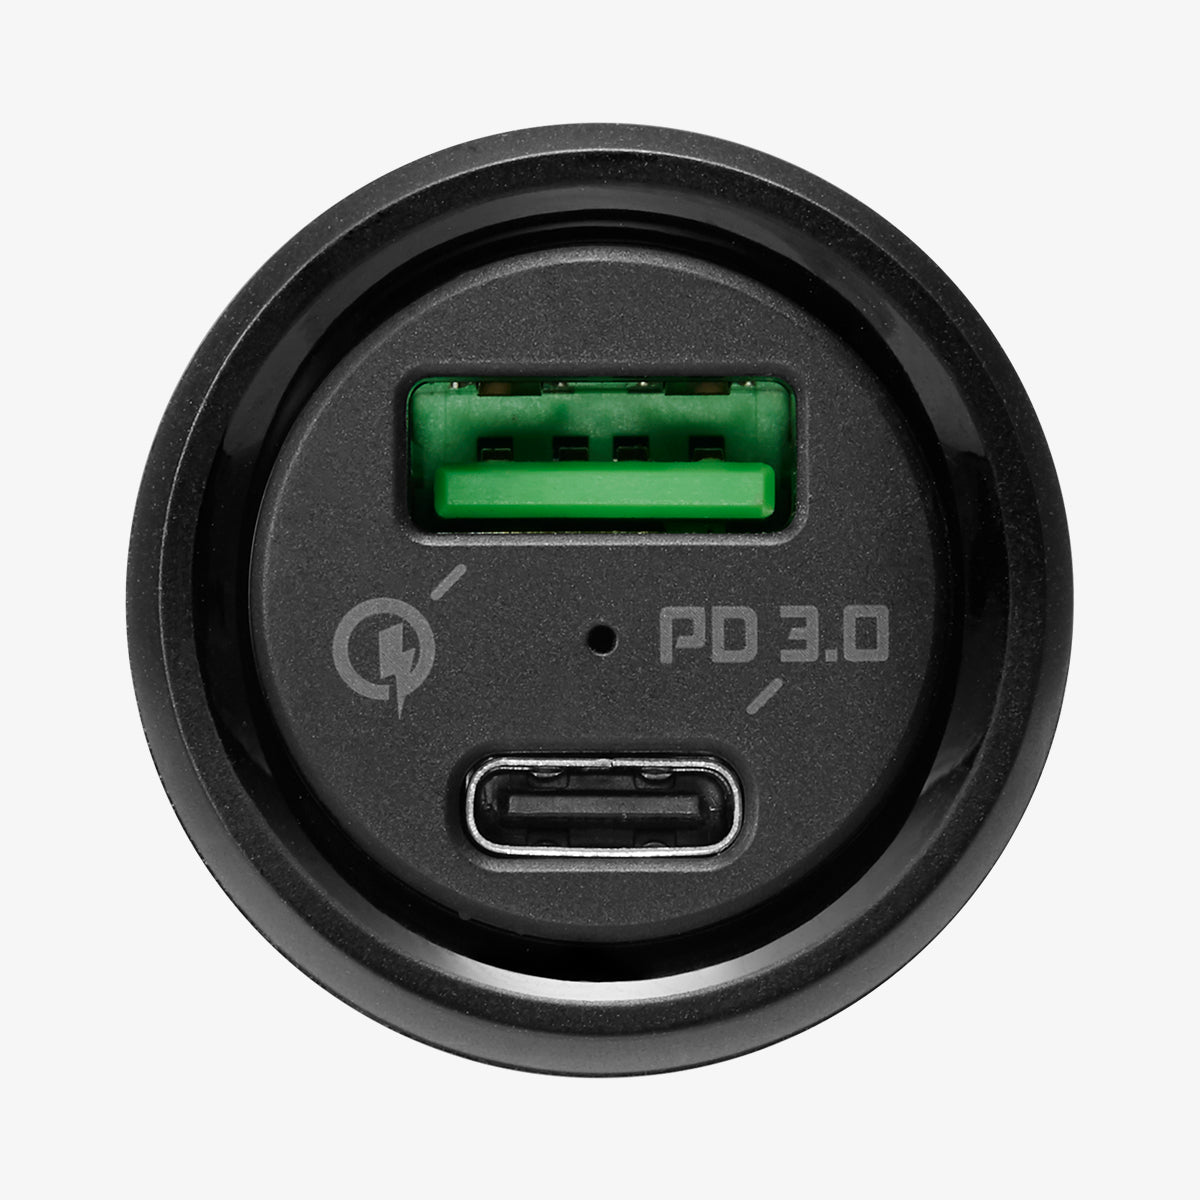 000CP25597 - SteadiBoost™ USB-C PD3.0 Car Charger showing the top with usb port